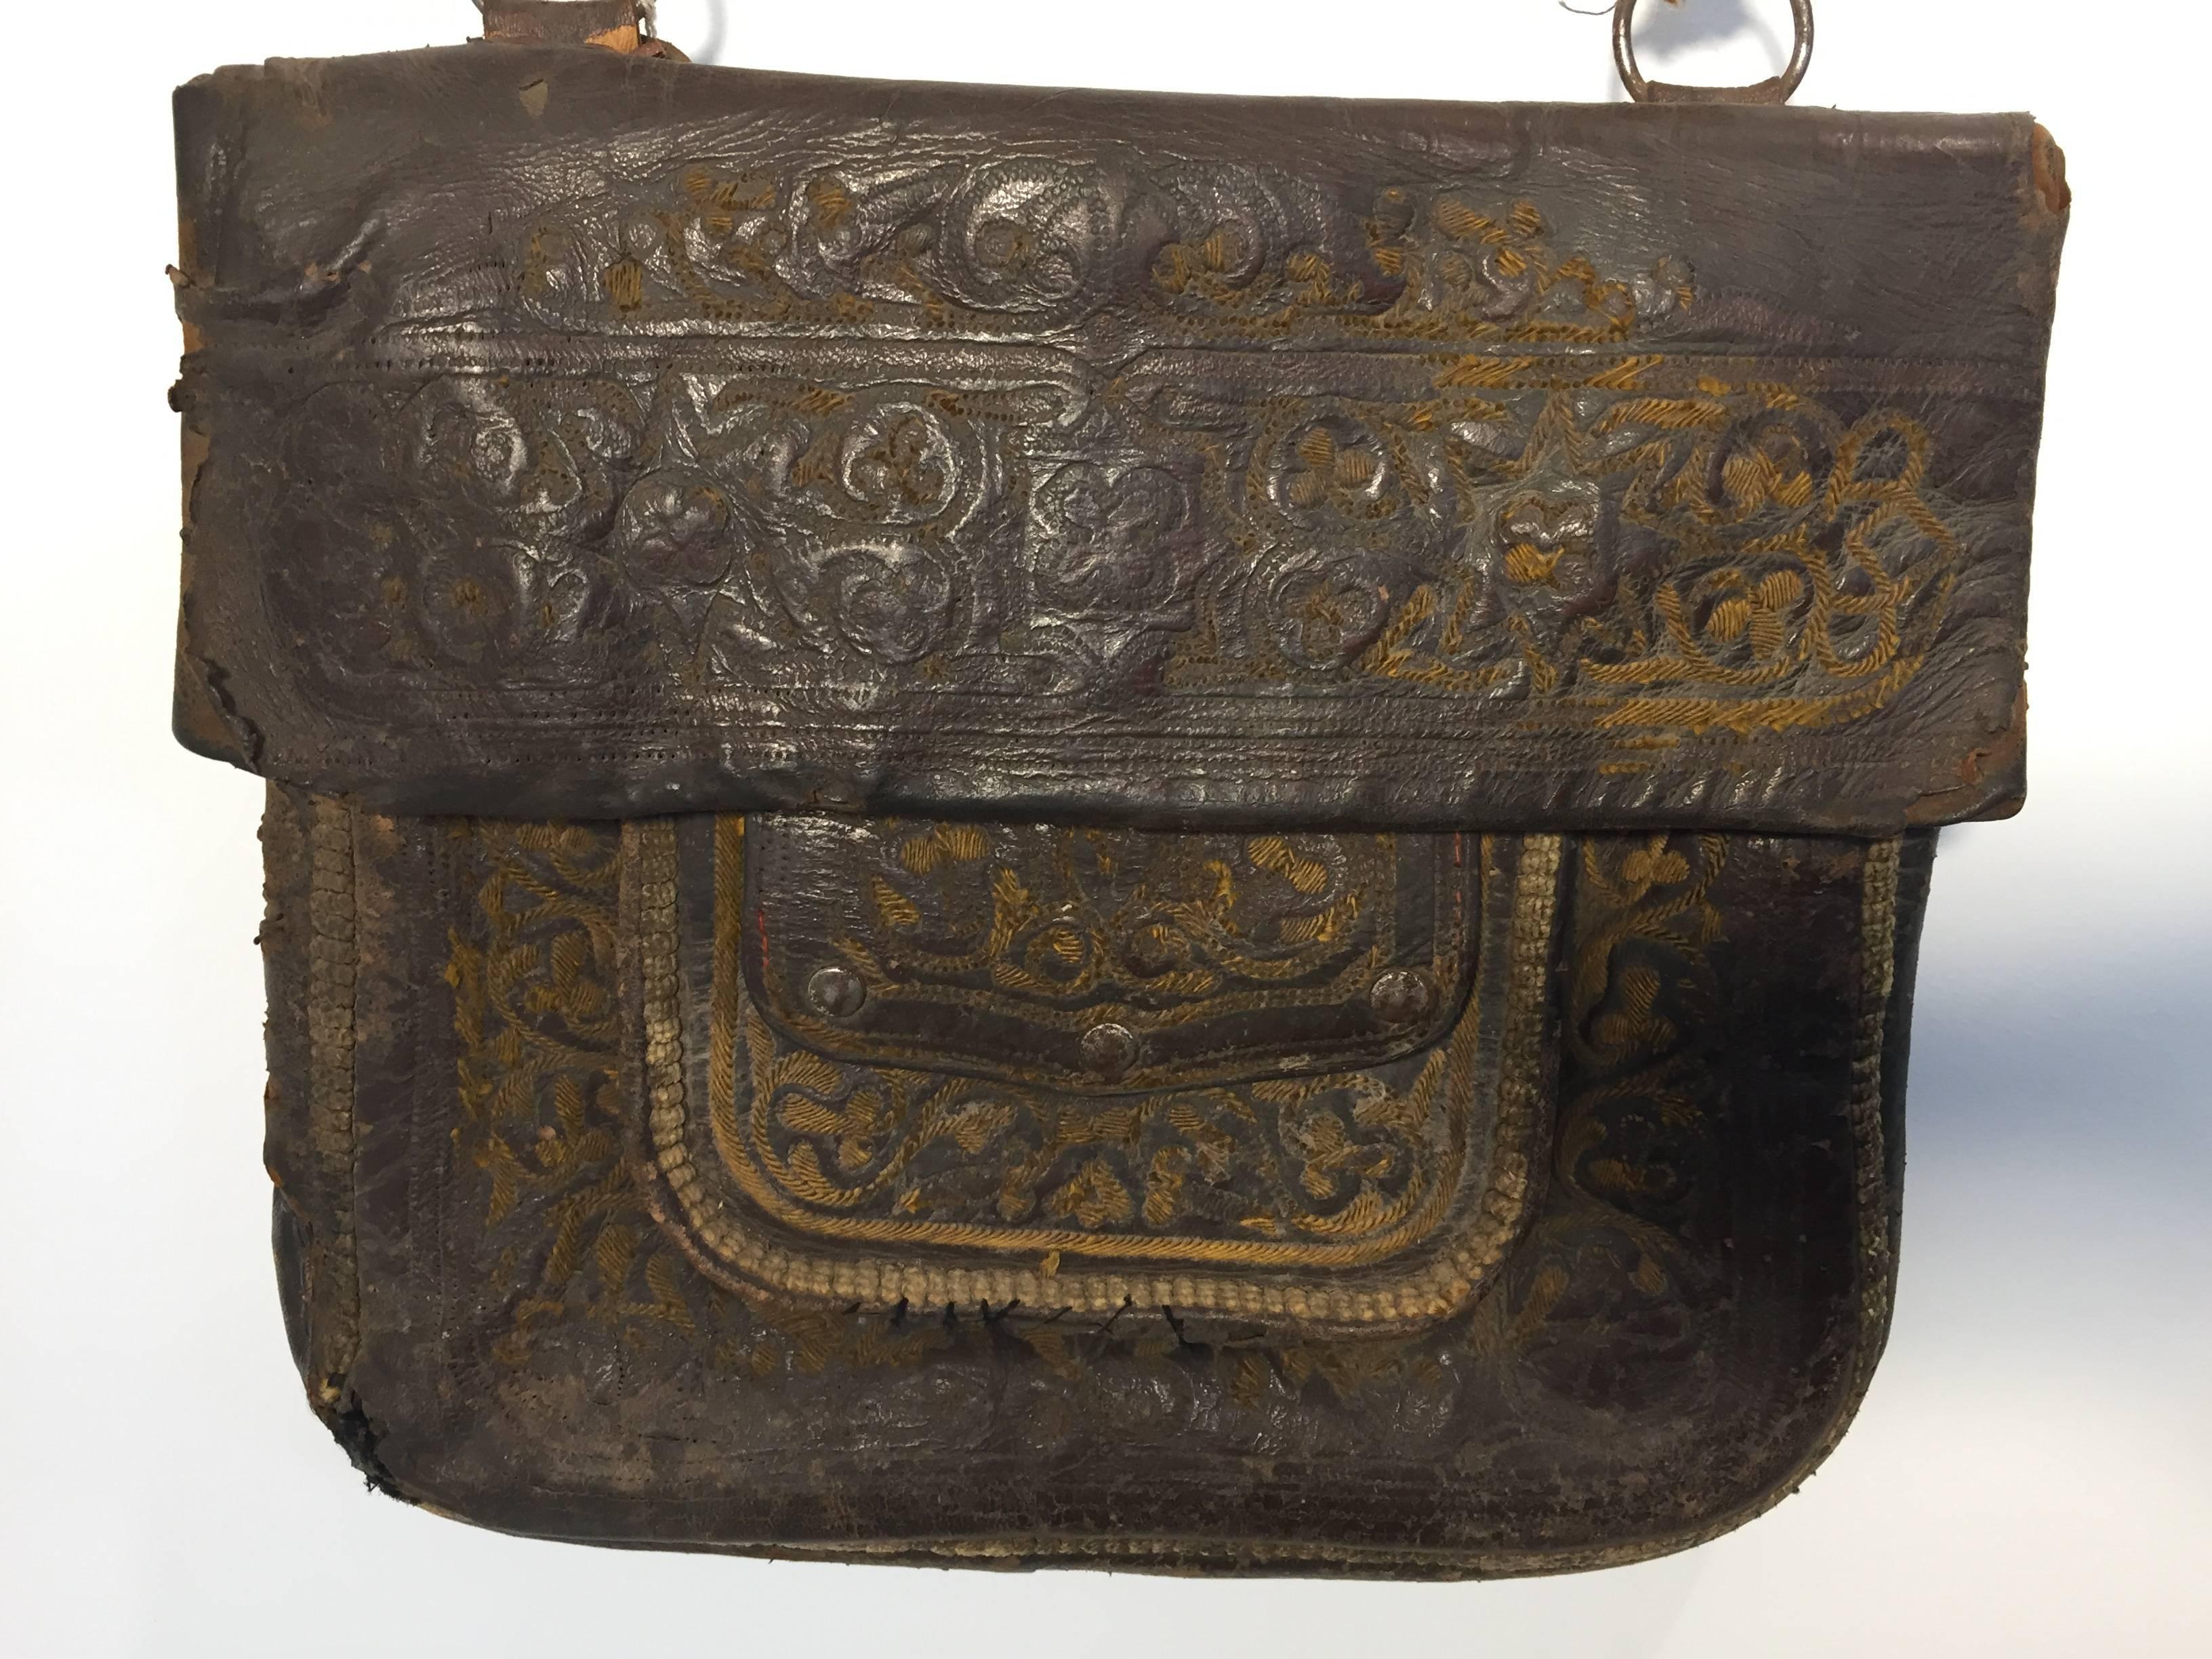 Antique  leather African Moroccan satchel bag with flap decorated with tribal embroideries.
Hand-tooled in Marrakech, this is an old antique shoulder slim bag, merchants in Morocco when traveling used this bag under their coat to put their money and